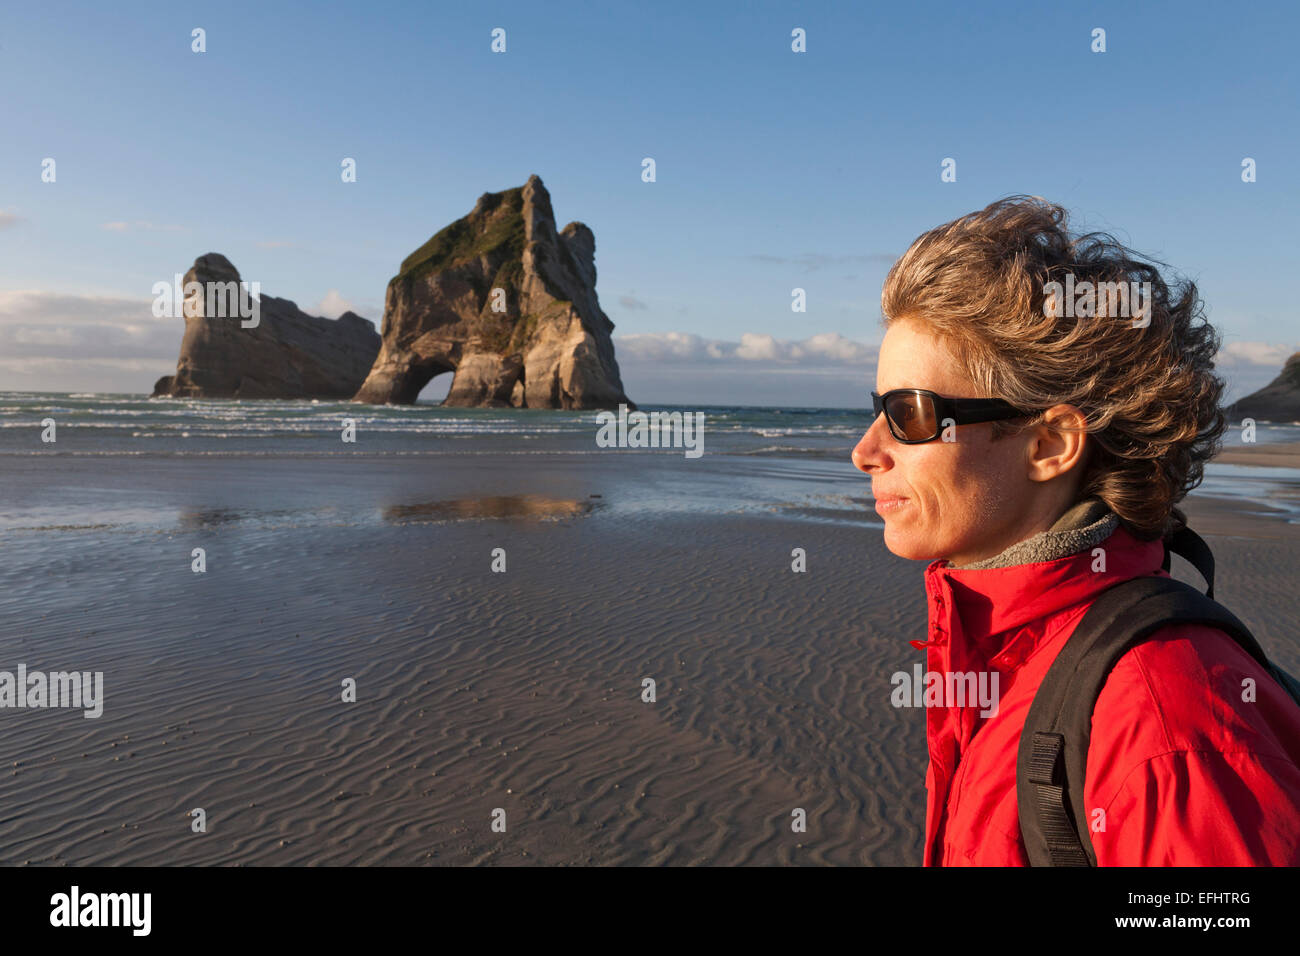 Woman on the beach on a windy day, Archway Islands in the background, Wharariki Beach, South Island, New Zealand Stock Photo